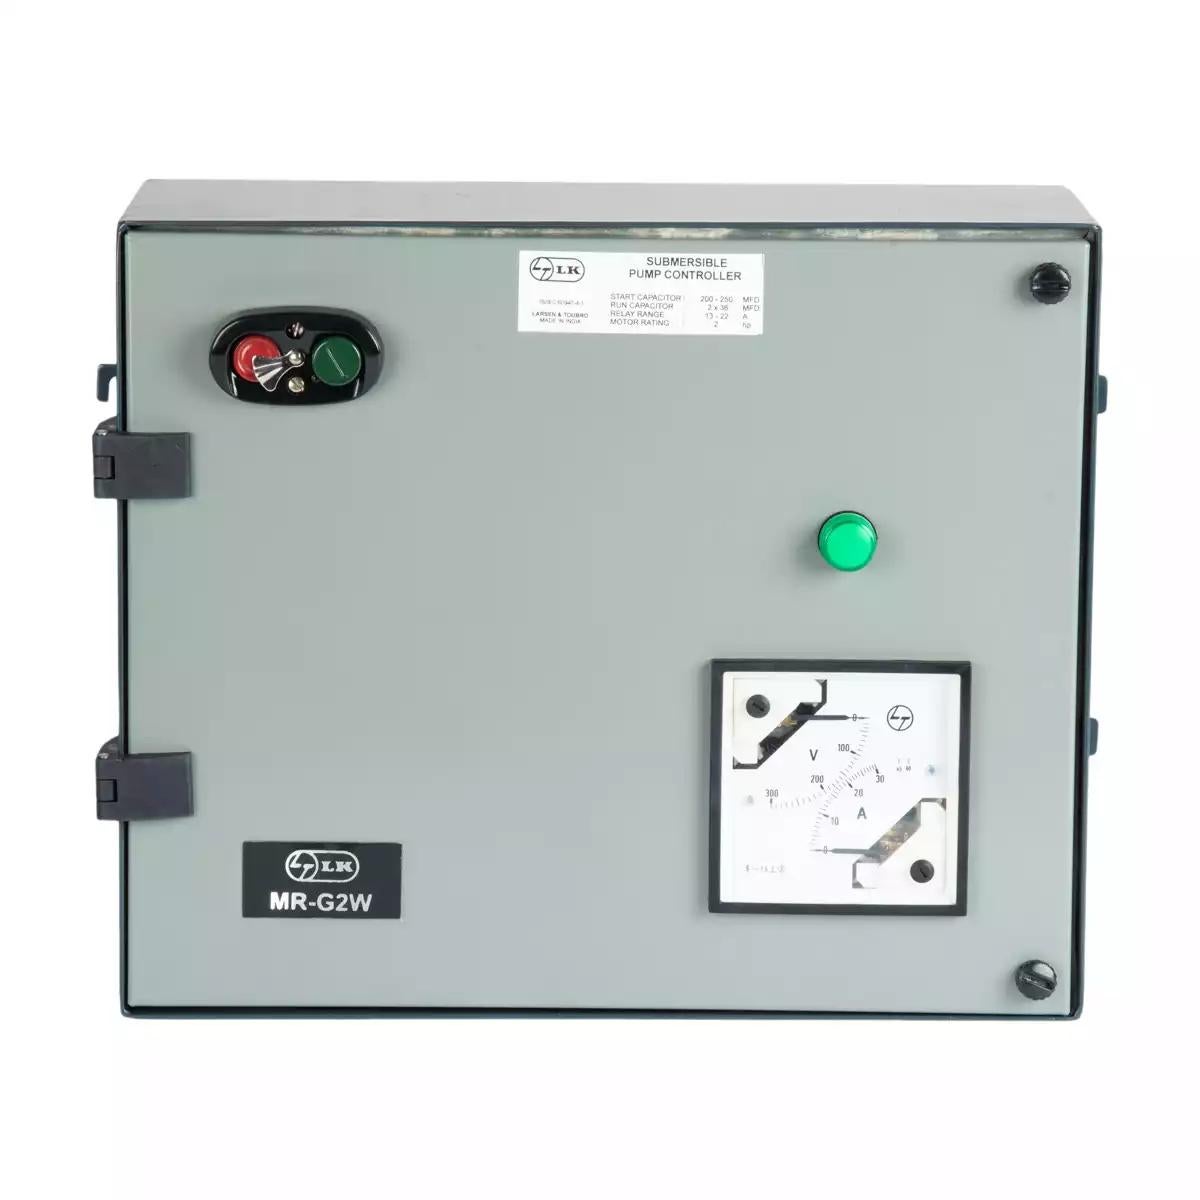 Single Phase Controller with WLC for Submersible Pump Application,MR-G2W,2HP,200 / 250mfd,2 x 36mfd (CS91043BECF)